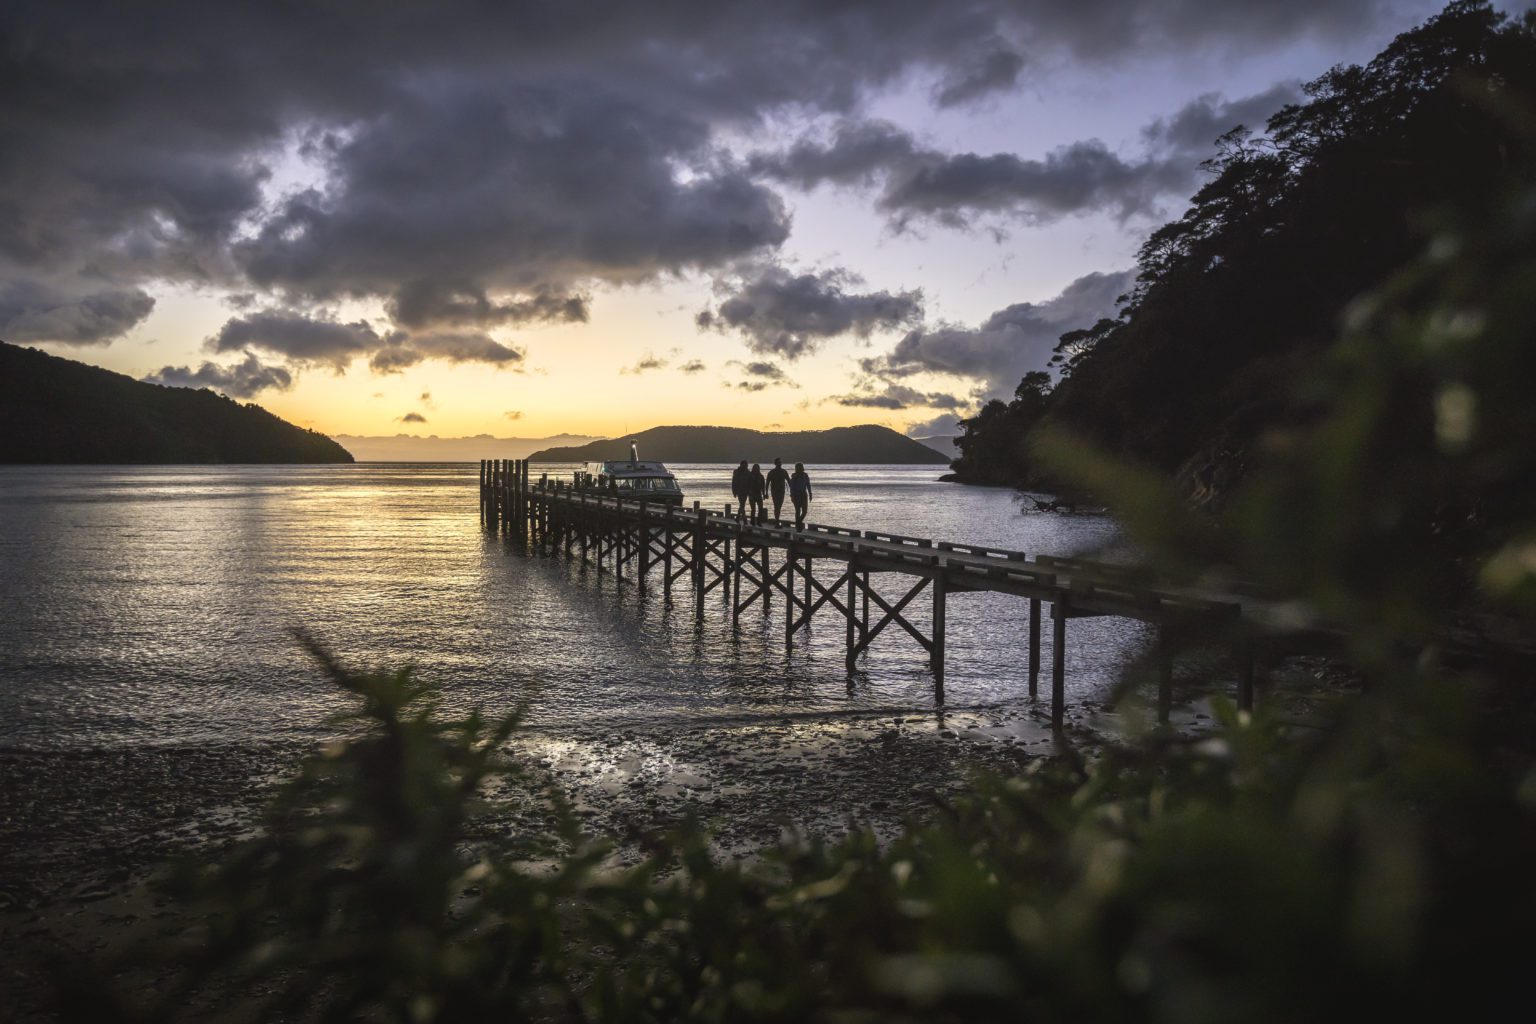 People walking along the jetty in Picton at sunset.